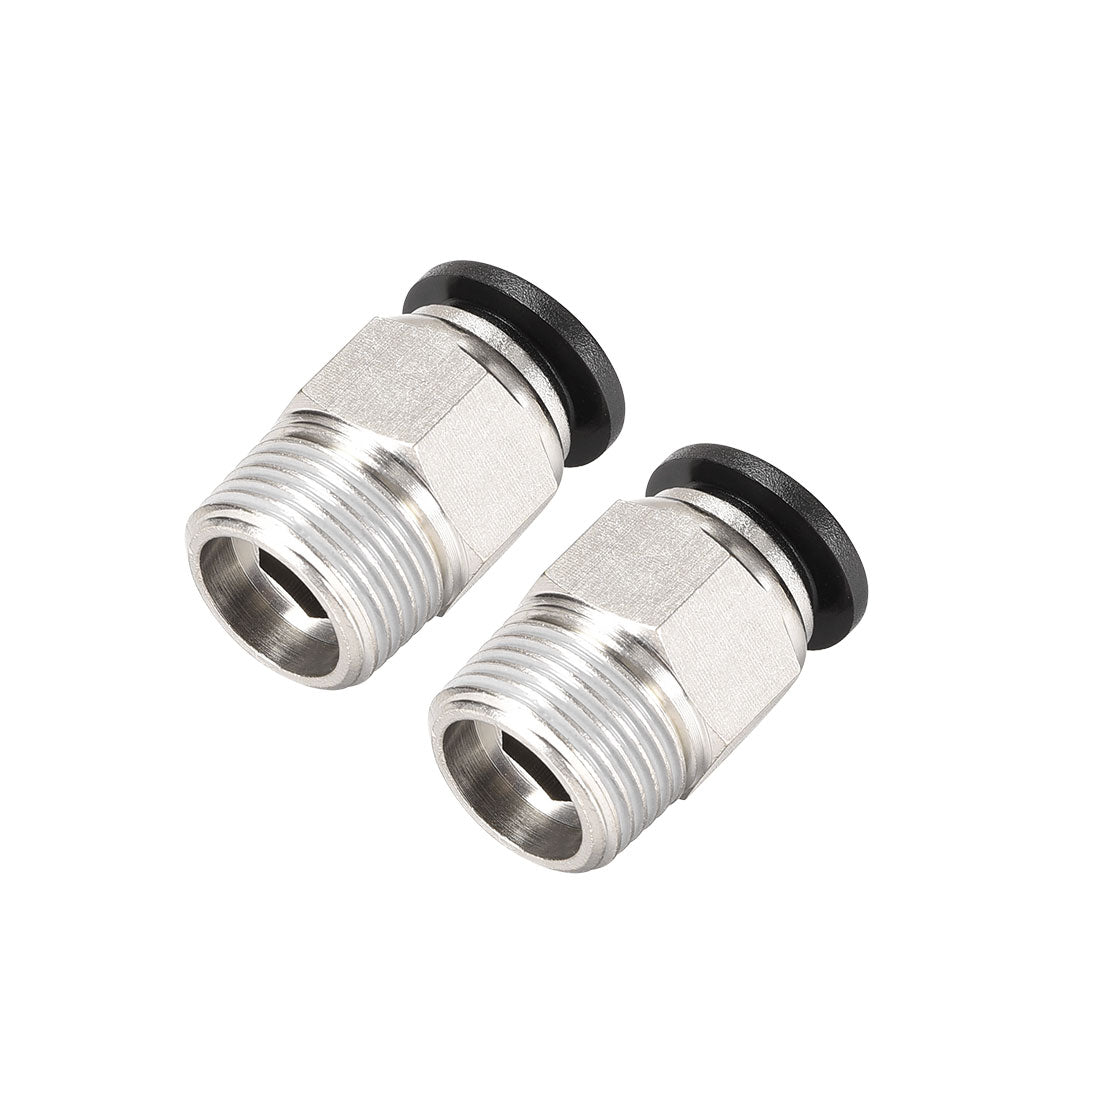 uxcell Uxcell Straight Pneumatic Push to Quick Connect Fittings 3/8NPT Male x 10mm Tube OD Silver Tone 2pcs